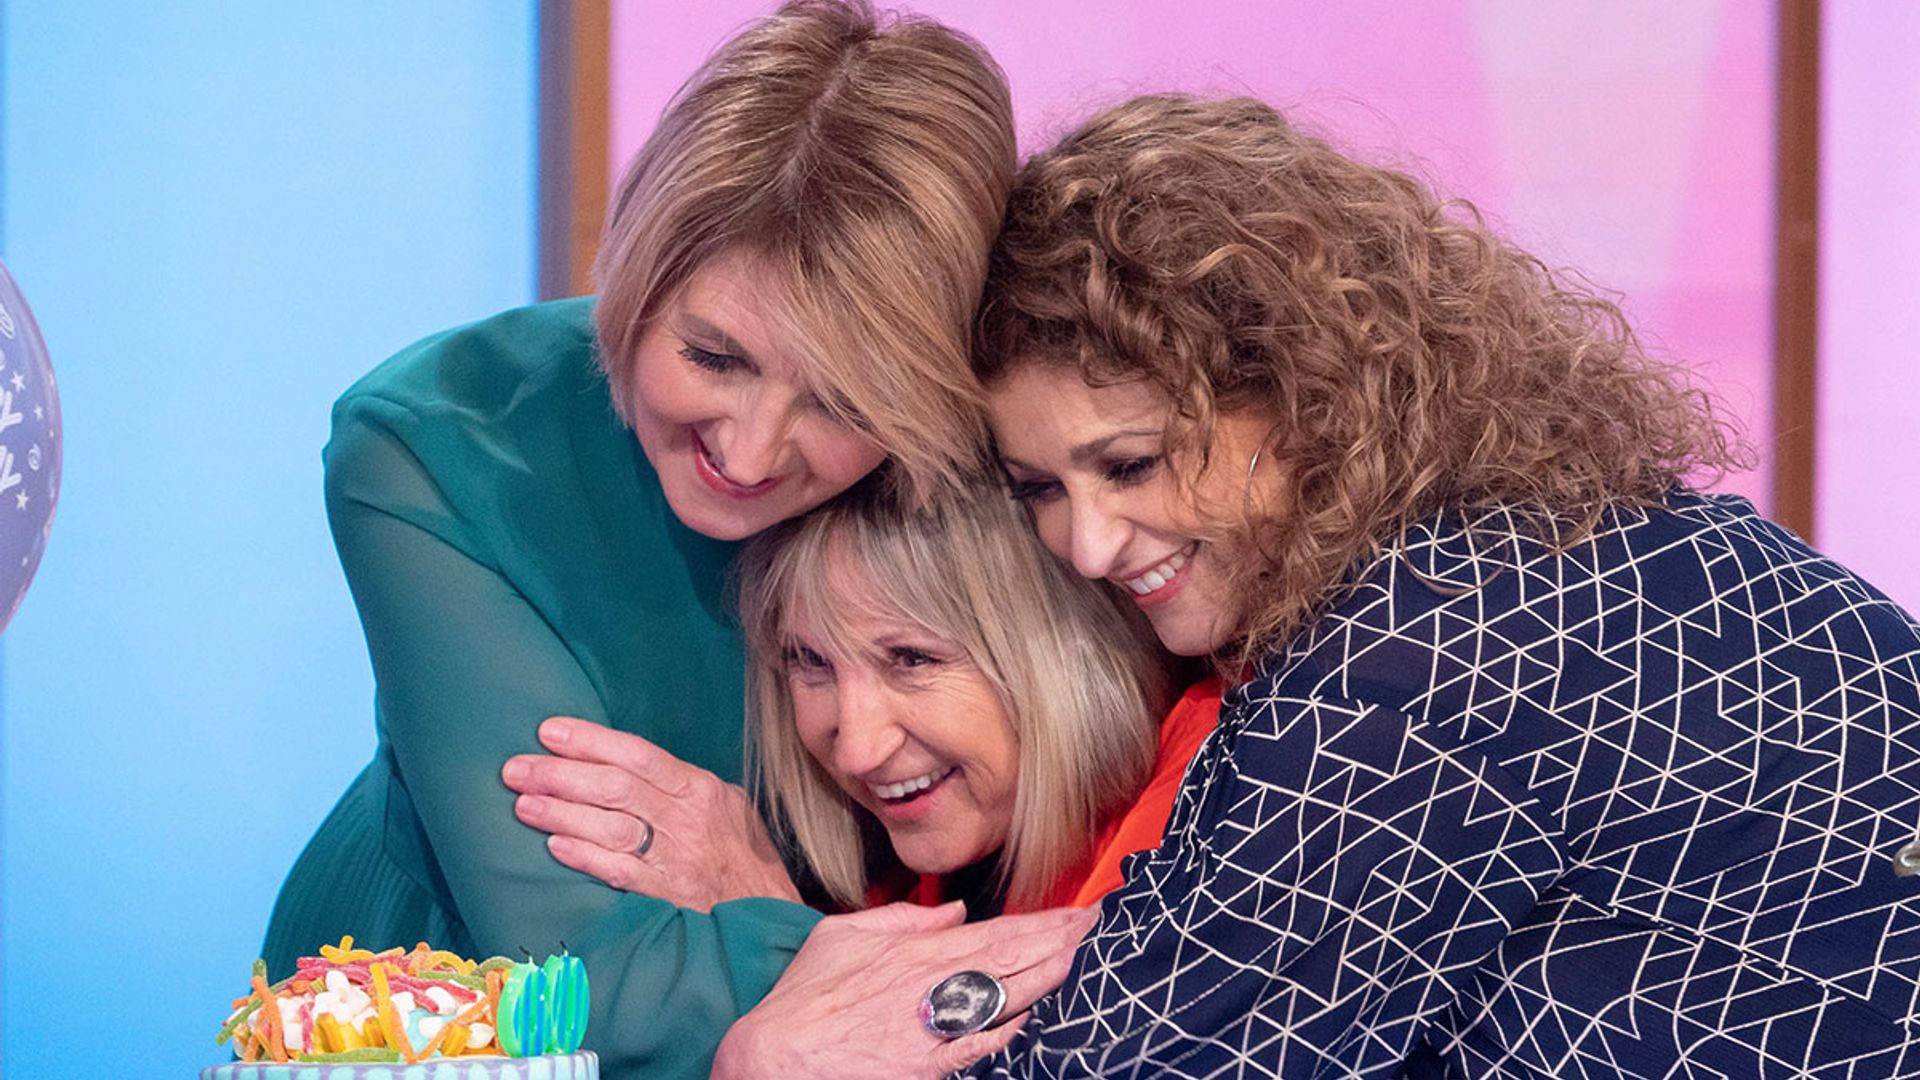 Nadia Sawalha reveals she's desperately missing this Loose Women co-star in sweet post